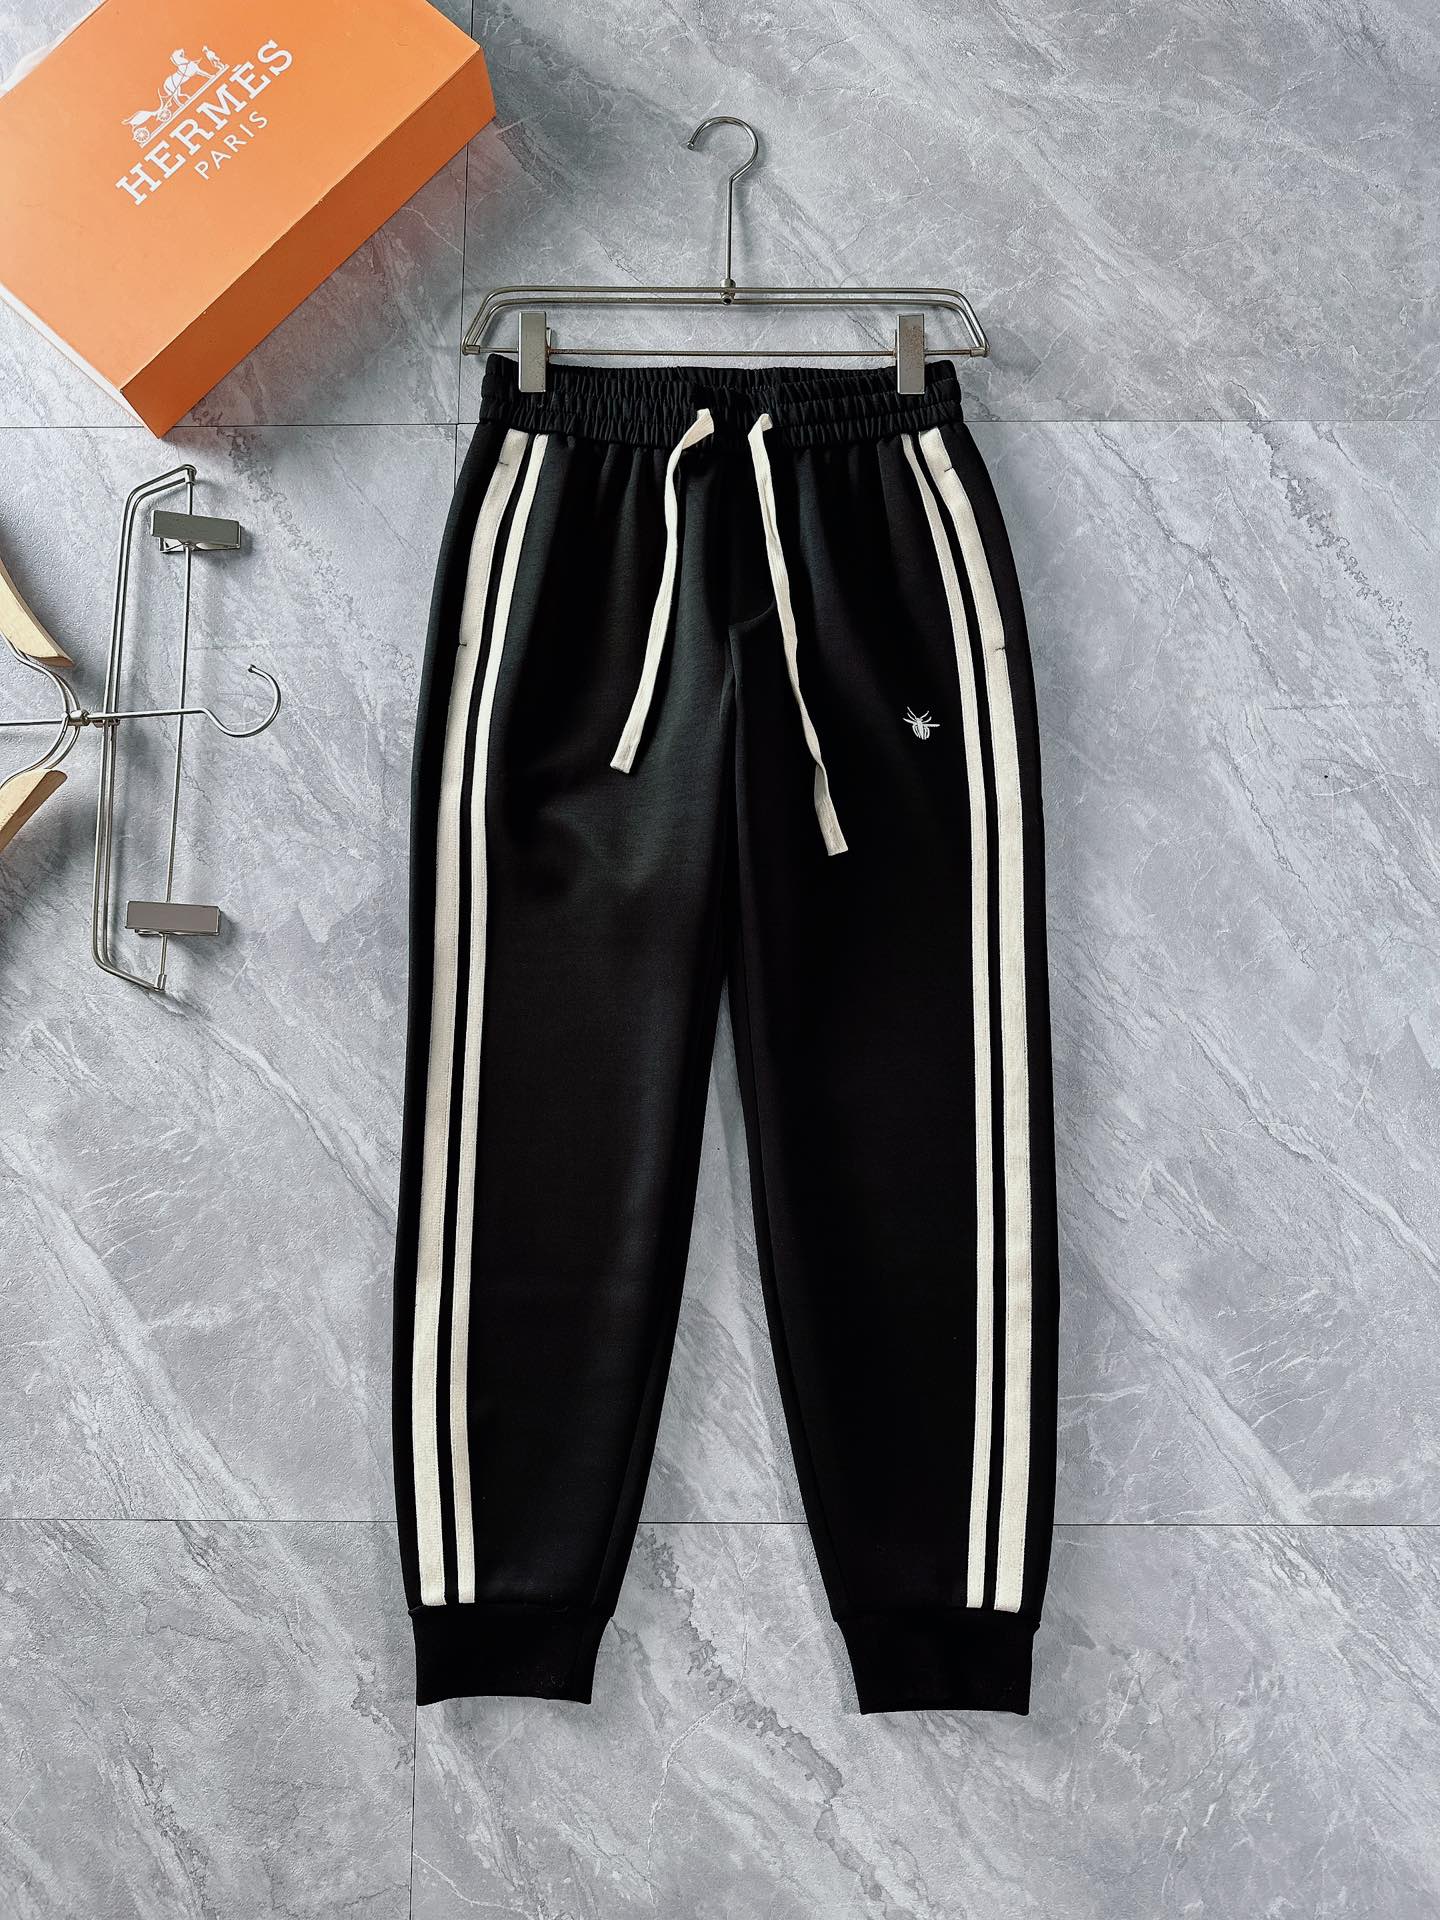 Dior Clothing Pants & Trousers Fall/Winter Collection Casual